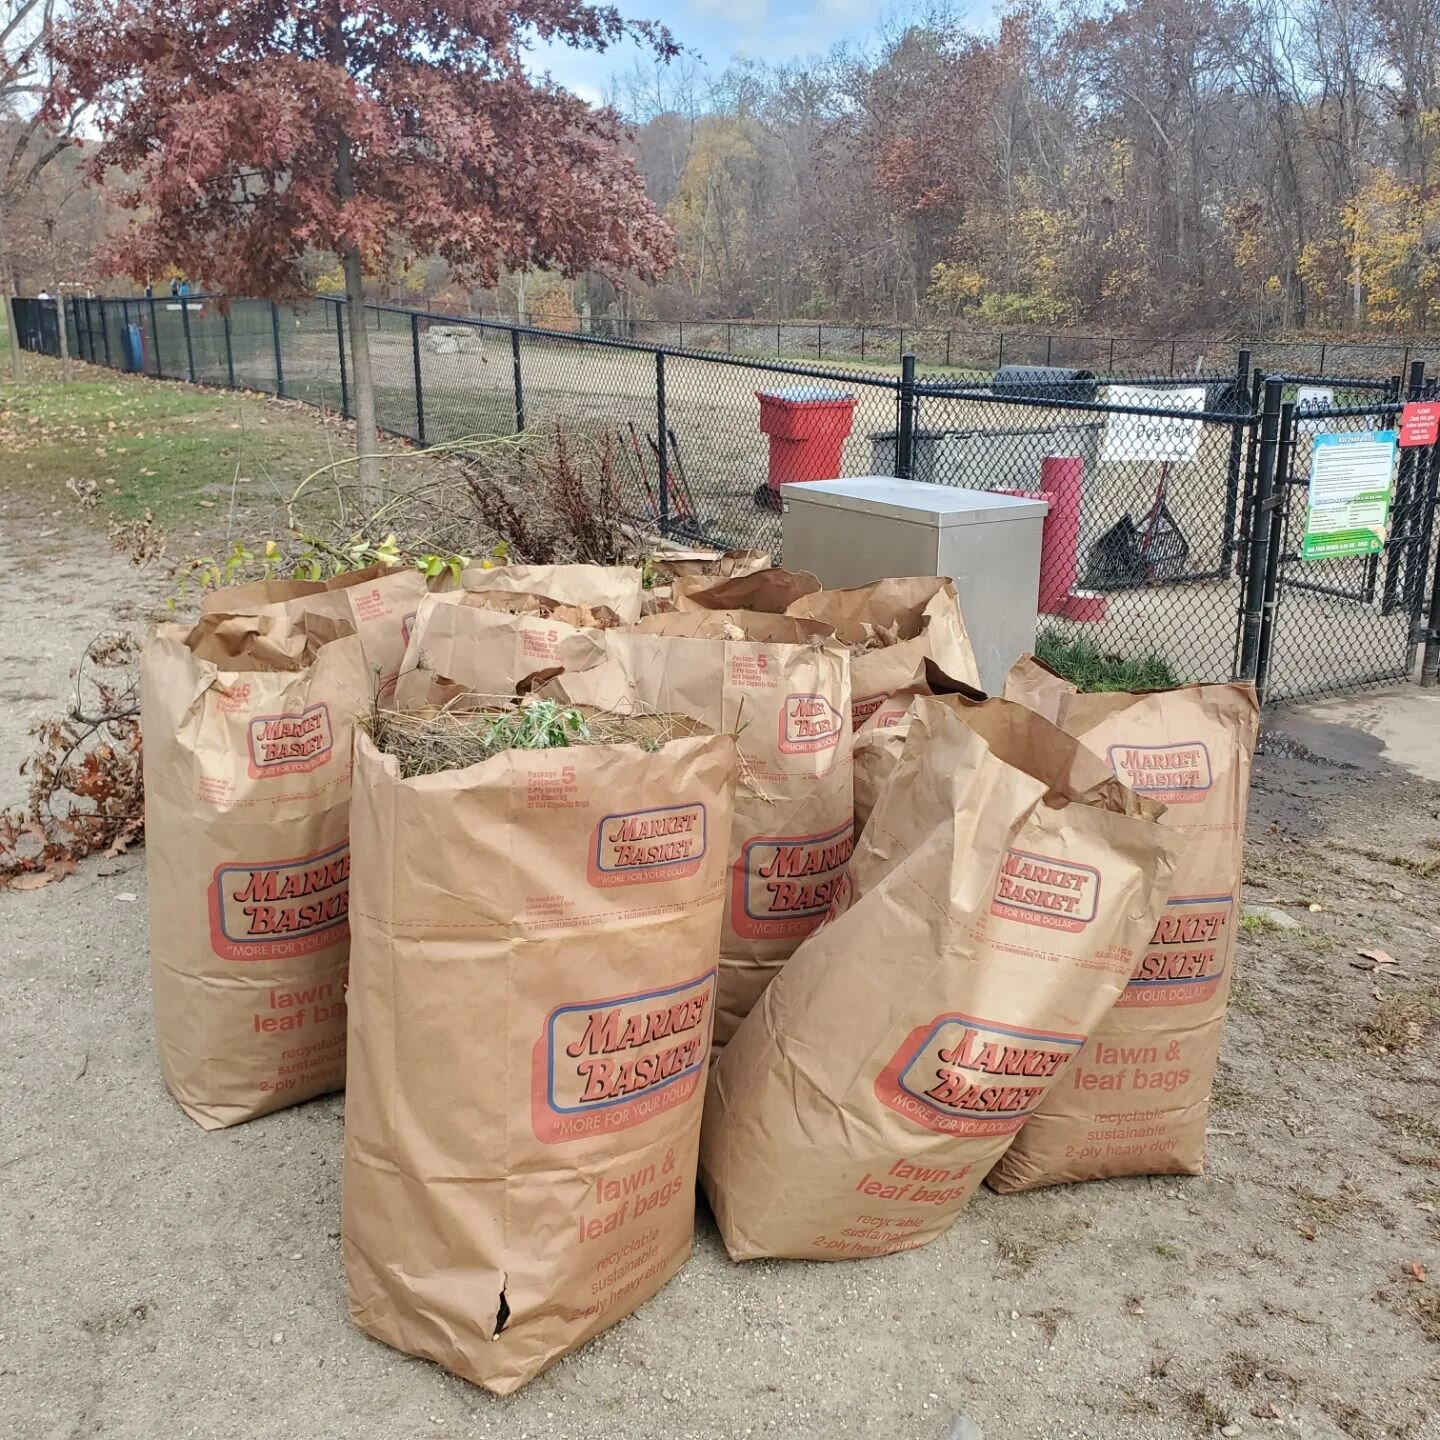 A great group helped cleanup the Fitchburg Dog Park this morning... it looks so nice and clean! 
We picked up leaves, trimmed trees and overgrowth, raked up some rocks, emptied all 5 trash cans, added some signage, picked up some stray 💩 and picked 